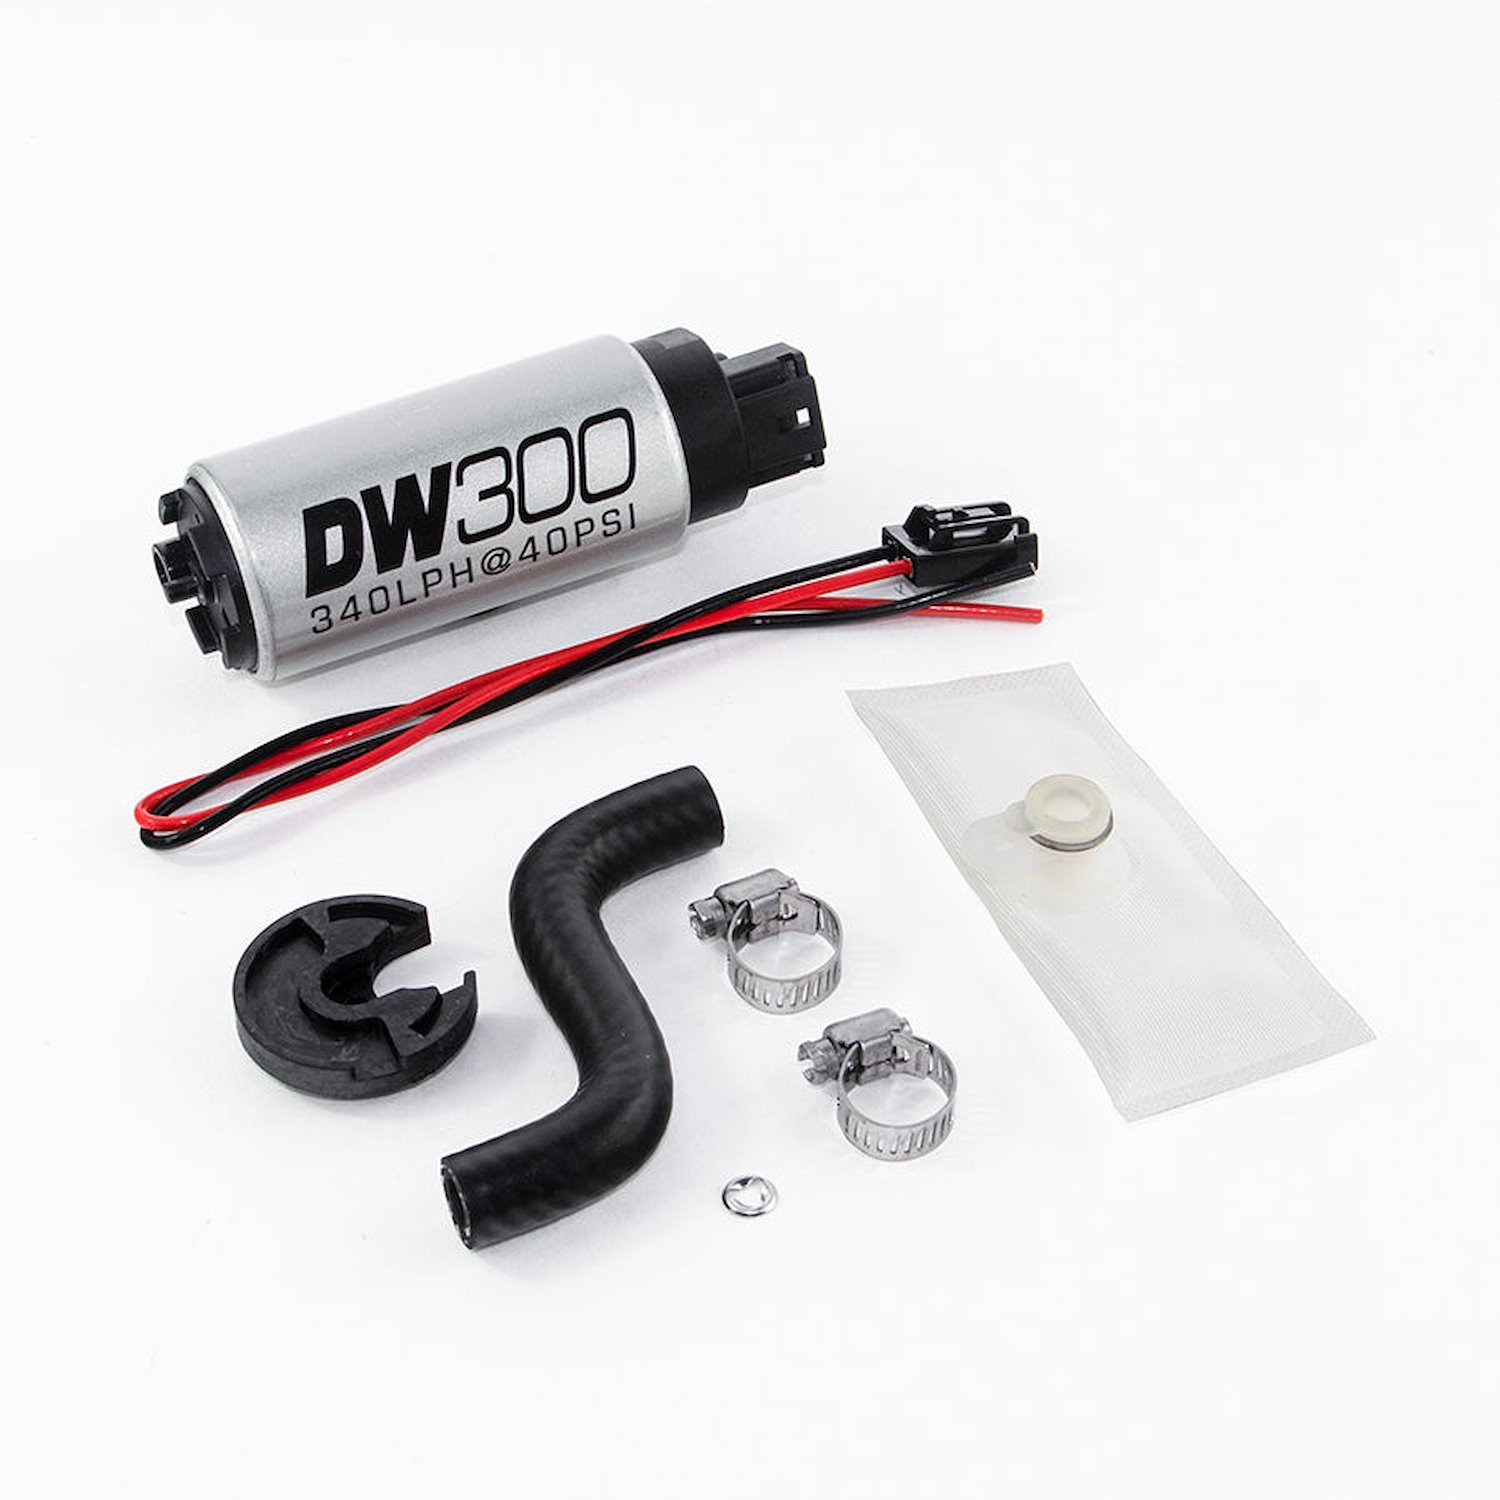 93011014 DW300 series 340lph in-tank fuel pump w/ install kit for 85-97 Ford Mustang